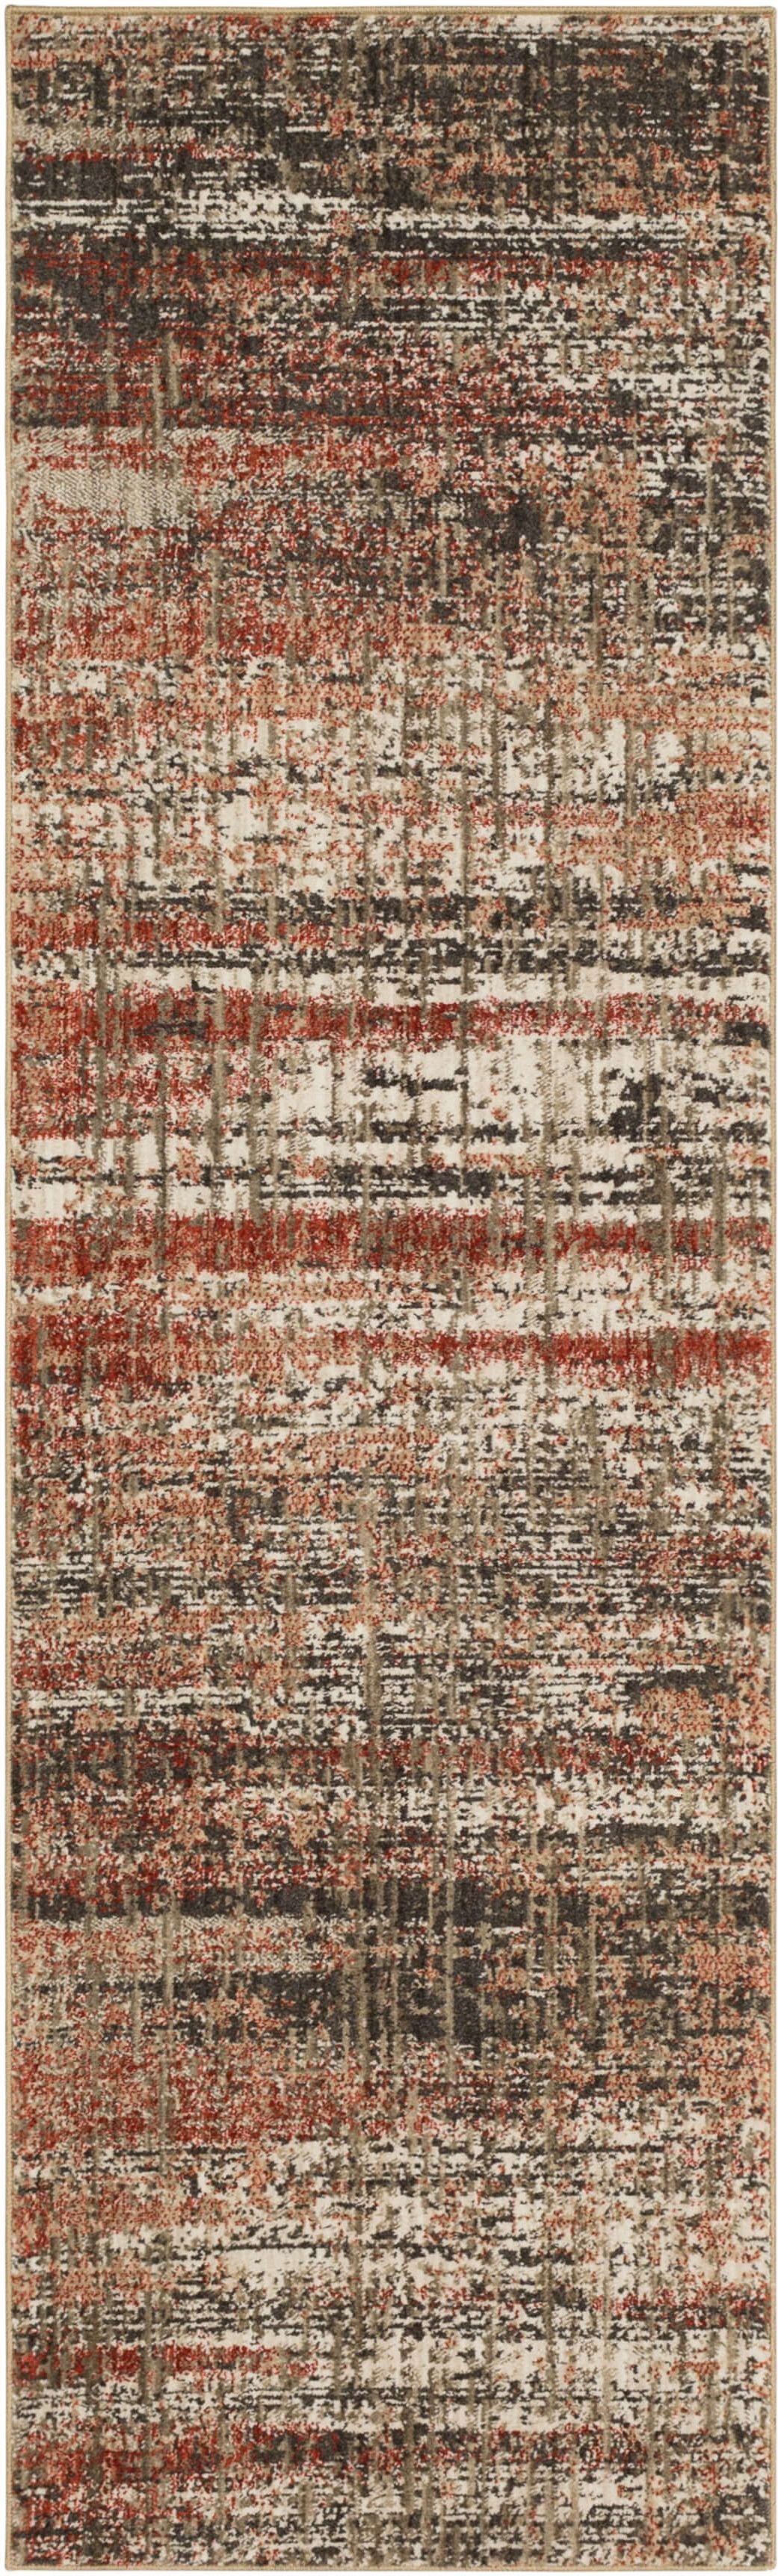 Scott Living Expressions by Scott Living 91826 Ginger  Modern/Contemporary Machinemade Rug